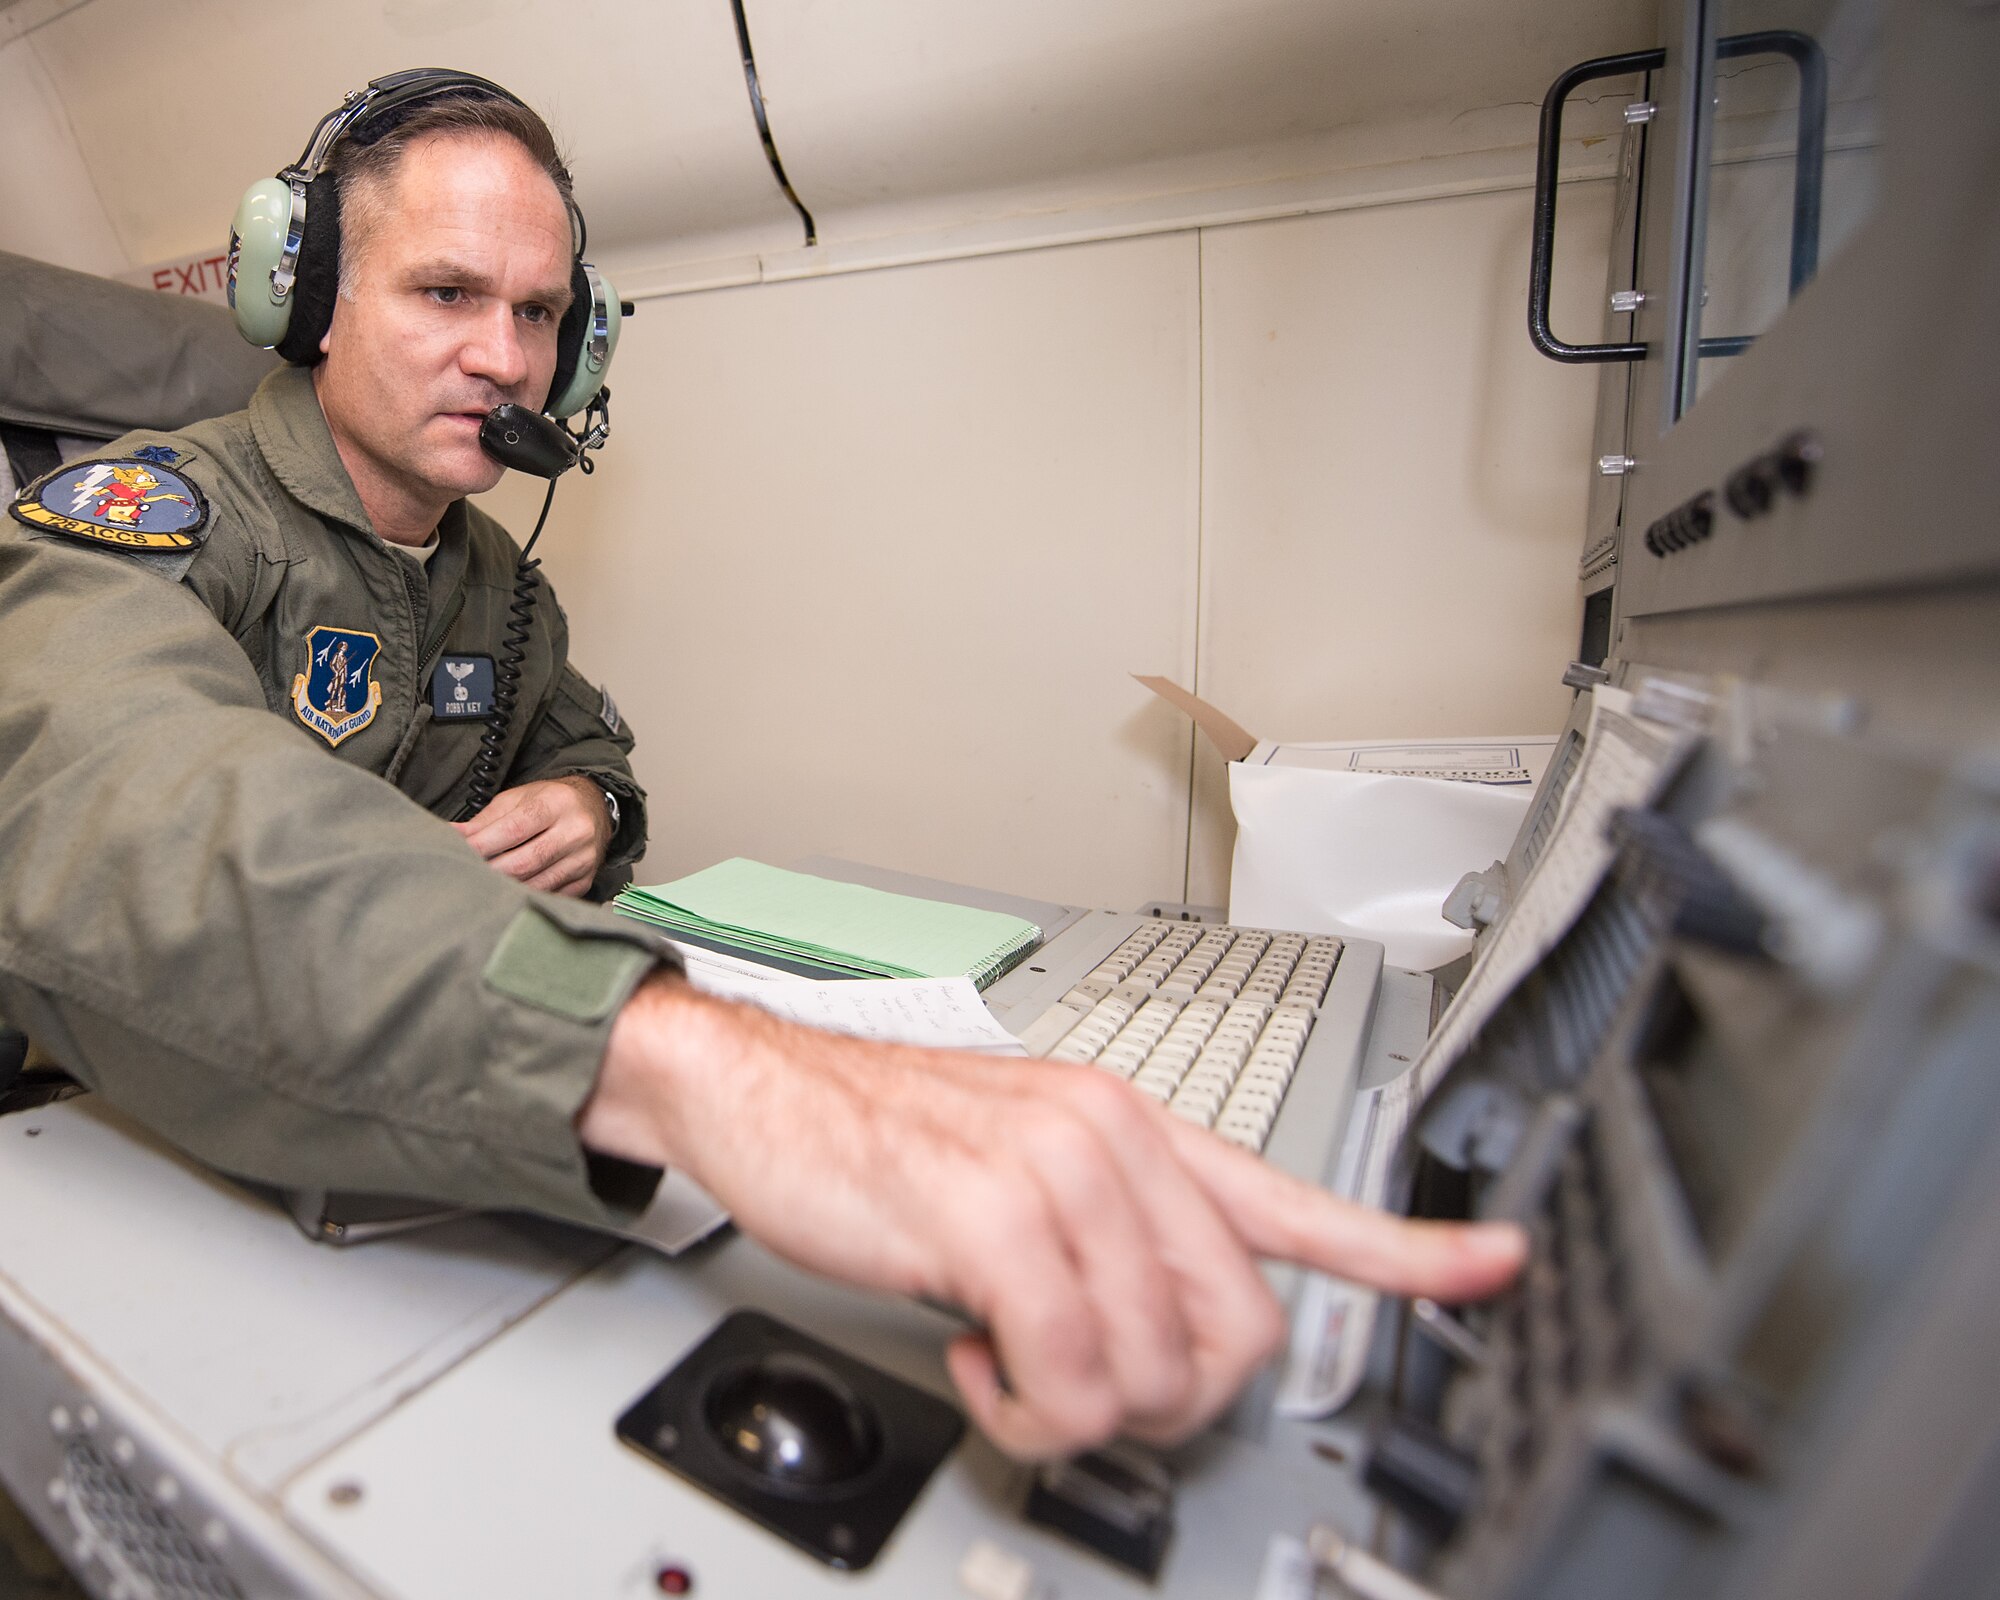 U.S. Air Force Lt. Col. Robby Key, mission crew commander with the 116th Air Control Wing (ACW), Georgia Air National Guard, inputs data and monitors tracking information from an operator work station aboard an E-8C Joint STARS during a mission in the Boars Nest 2015 exercise, Robins Air Force Base, Ga., Aug. 20, 2015. The 116th ACW hosted the eighth annual Boars Nest Large Force Exercise bringing together more than 20 joint-force units and 55 different aircraft for aircrew training in a realistic land and maritime threat environment. Crews flying the E-8C Joint STARS manned platform, used their unique battle management, command and control, intelligence, surveillance and reconnaissance capabilities, integrated with other Air National Guard, Air Force, Navy, and Marine aircraft, to complete maritime and land-based missions during the exercise. (U.S. Air National Guard photo by Senior Master Sgt. Roger Parsons/Released)